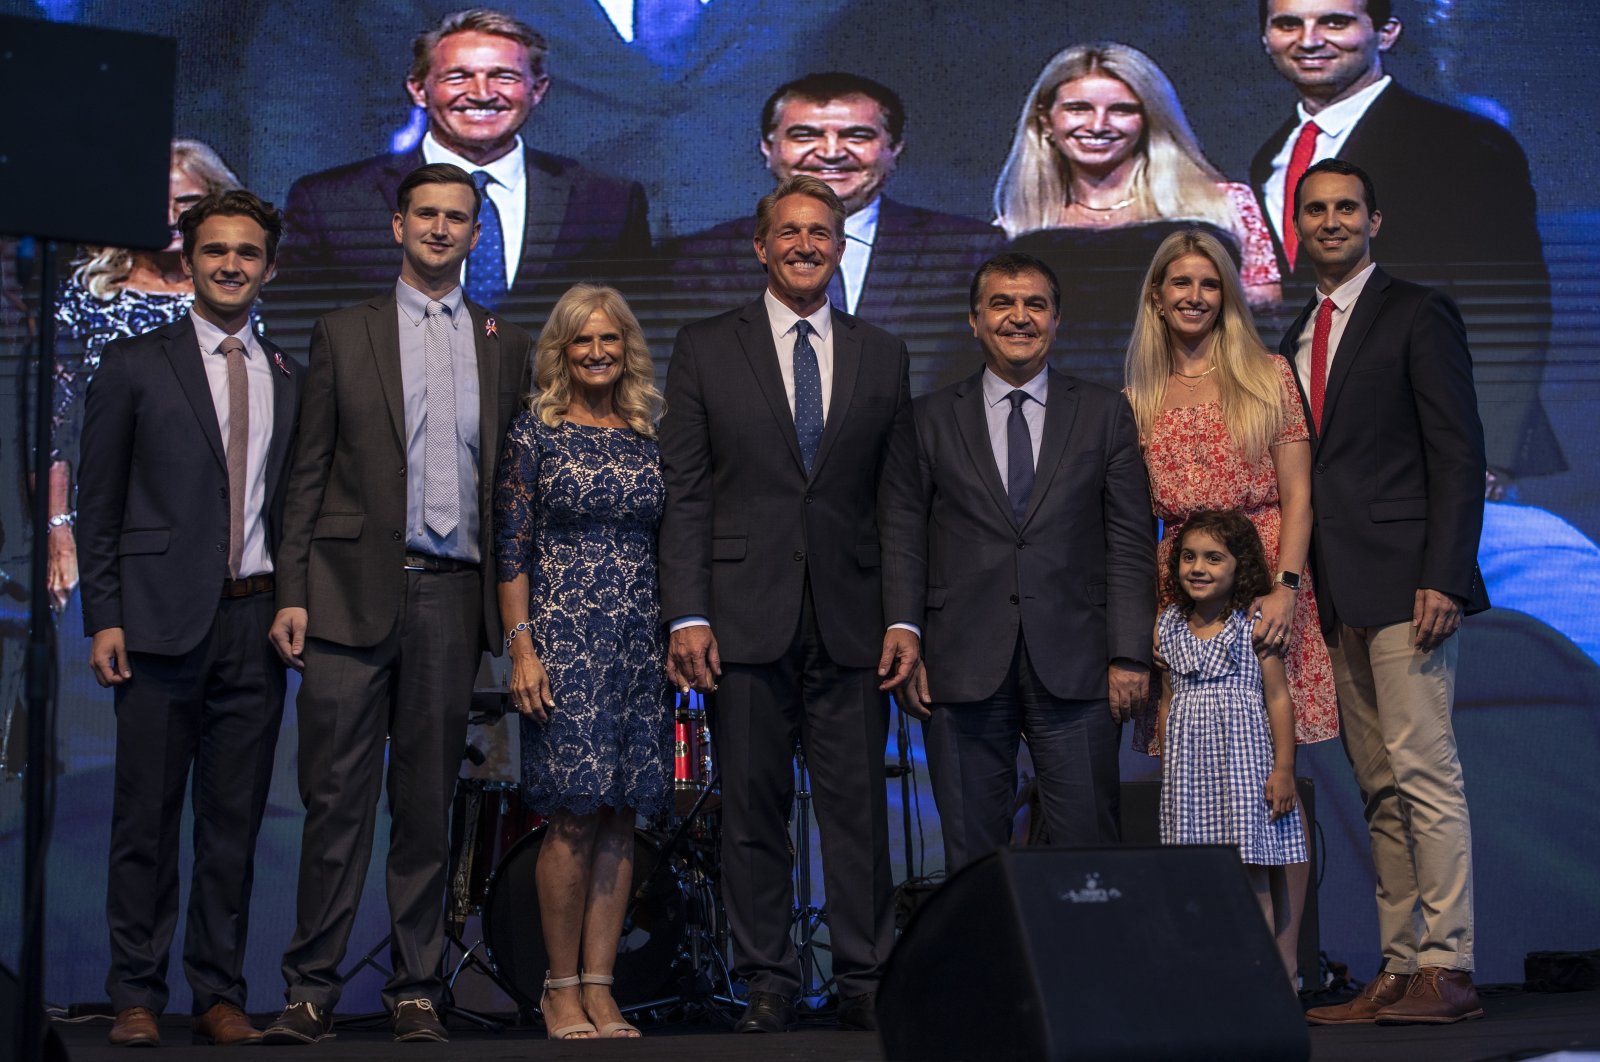 U.S. Ambassador to Turkey Jeff Flake together with his family and Deputy Foreign Minister Faruk Kaymakcı at a reception in Ankara, Turkey, June 29, 2022 (AA Photo)